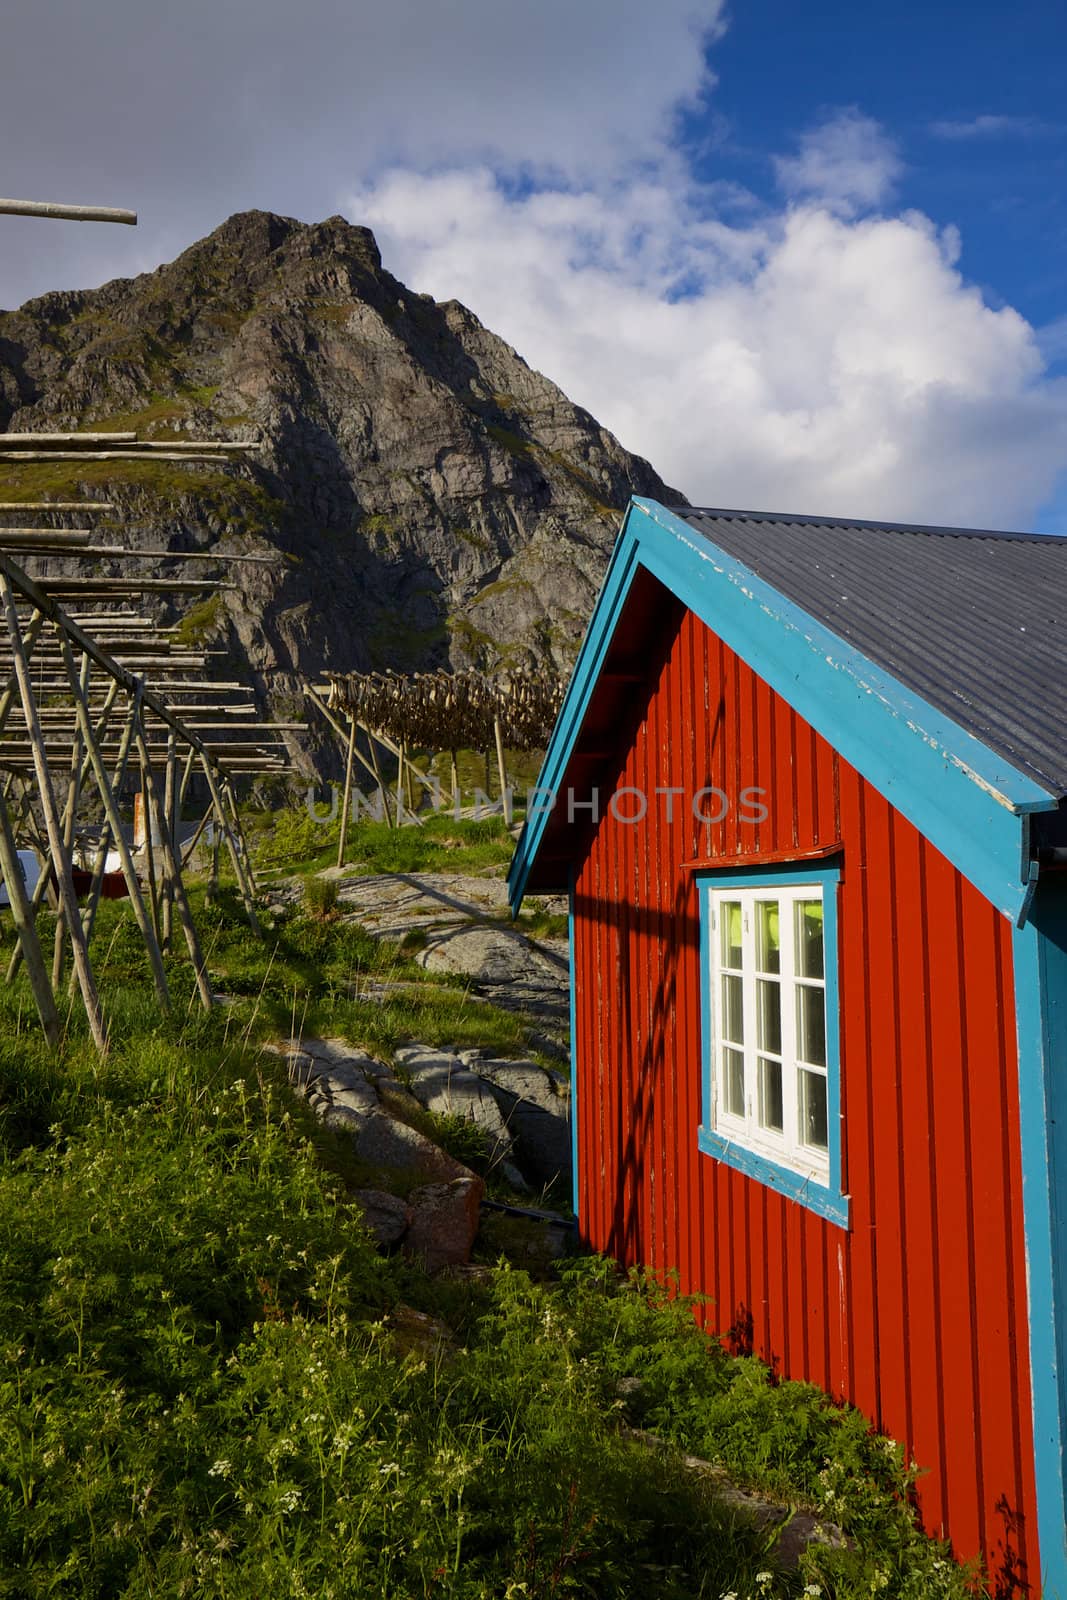 Picturesque red fishing hut with racks for drying stockfish on Lofoten islands in Norway